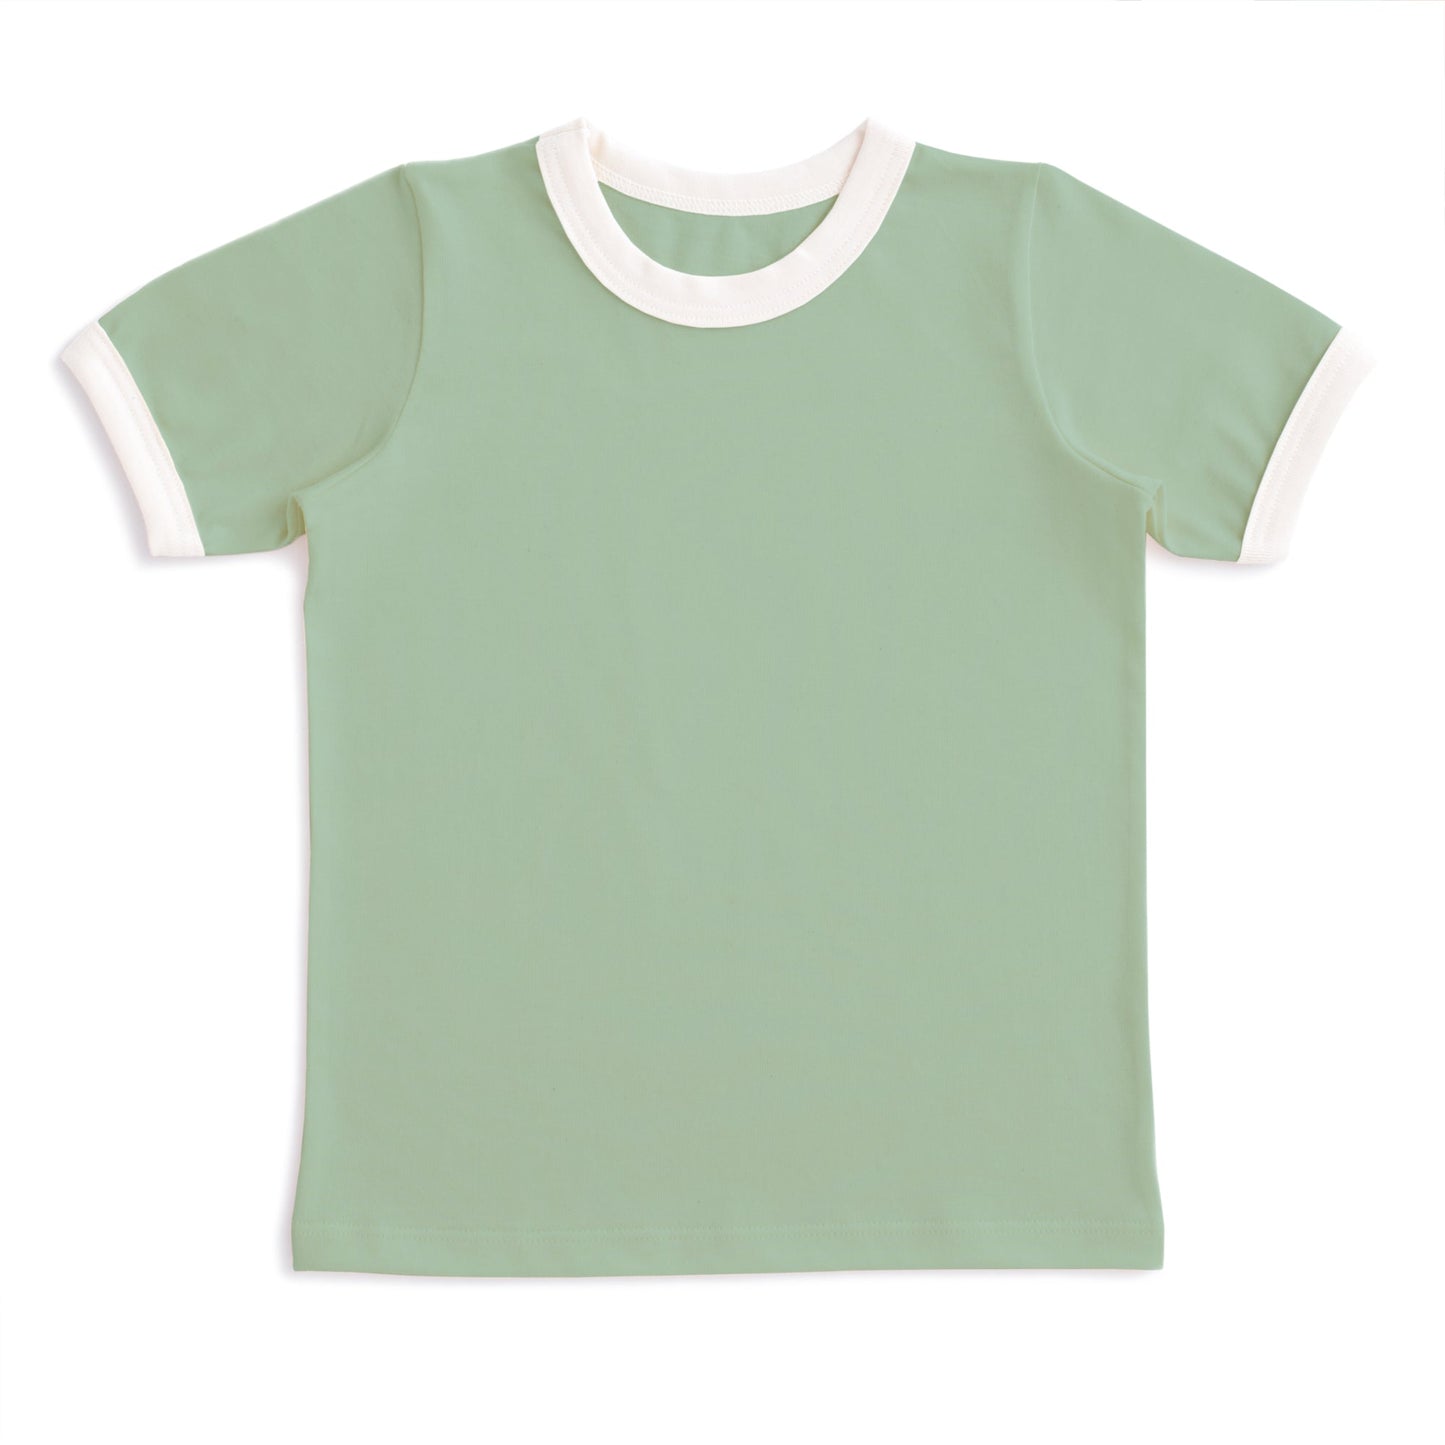 Ringer Tee - Solid Meadow Green